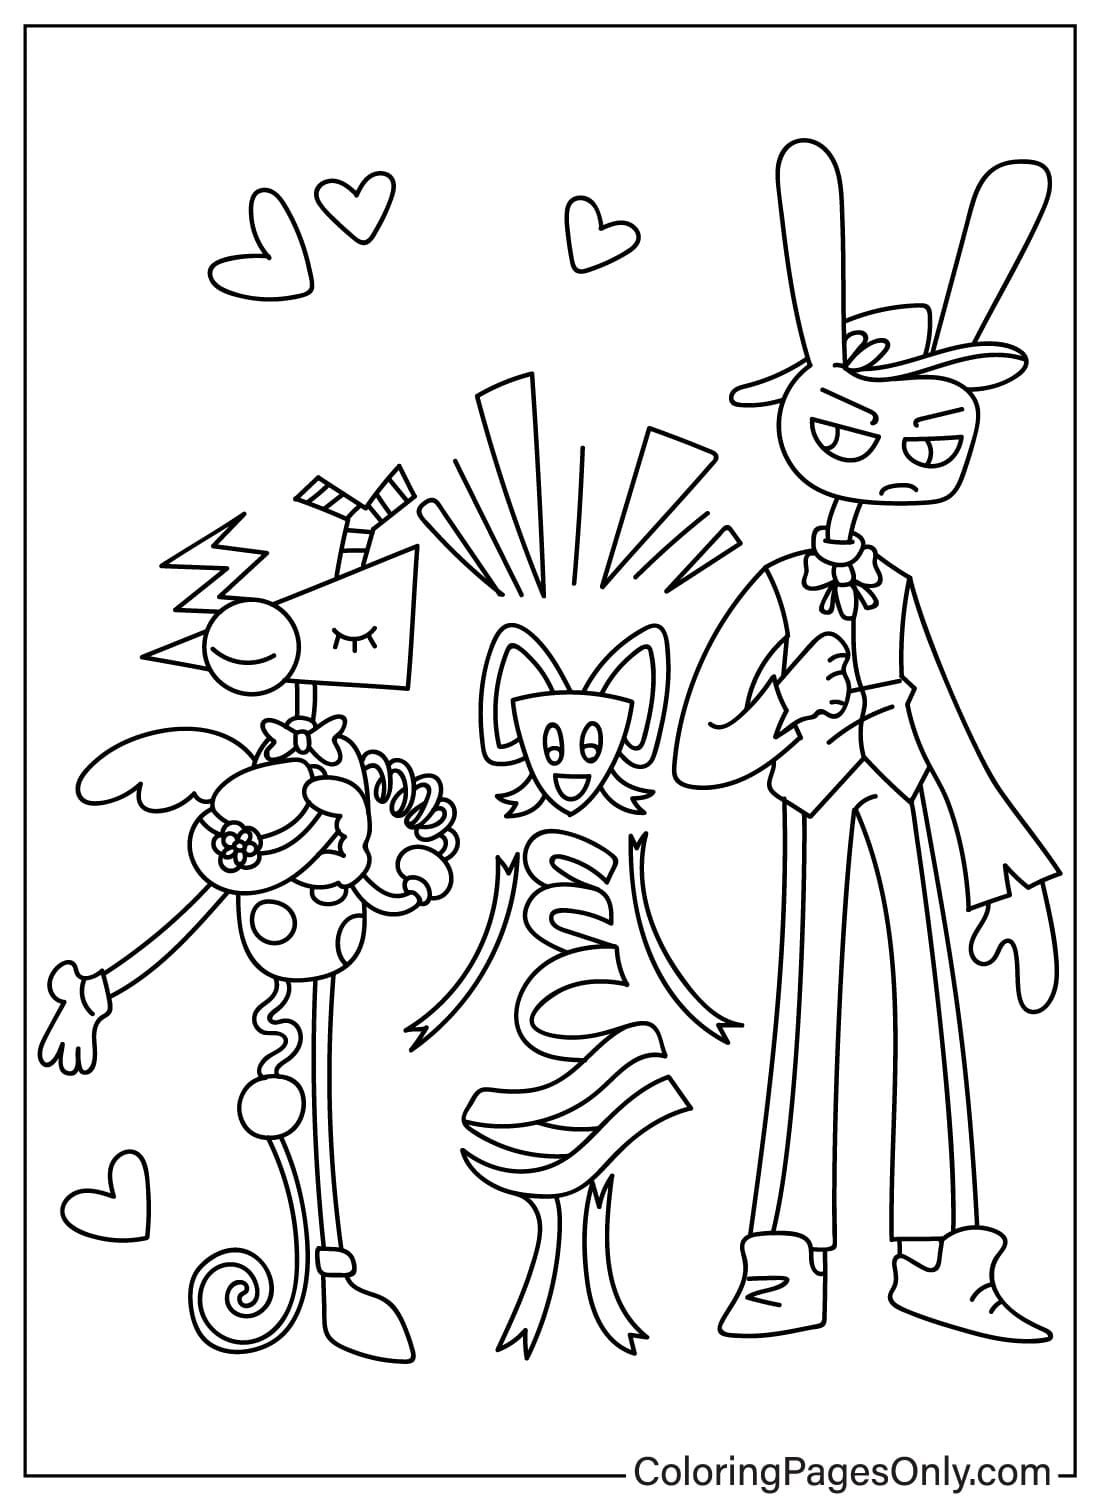 Zooble, Jax and Gangle Coloring Page from Jax